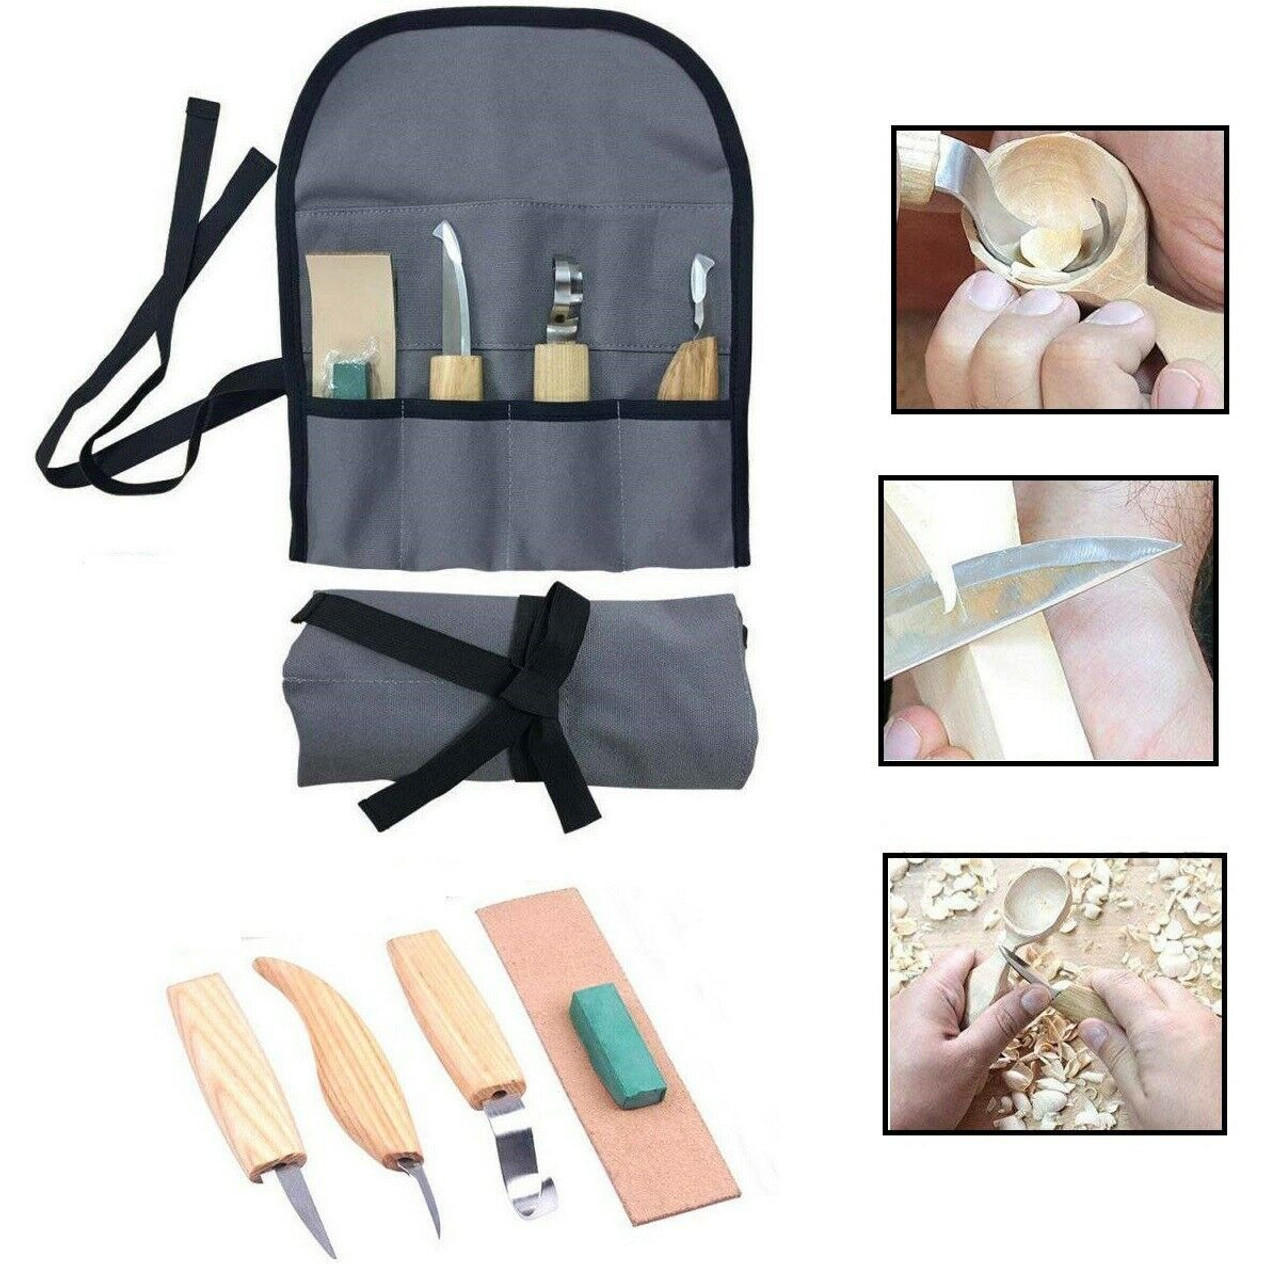 Wood Whittling Kit for Beginners Kids and Adults,Wood Carving kit Set With  8PCS Basswood Carving Blocks,Wood Carving Tools Gift include 6PCS Whittling